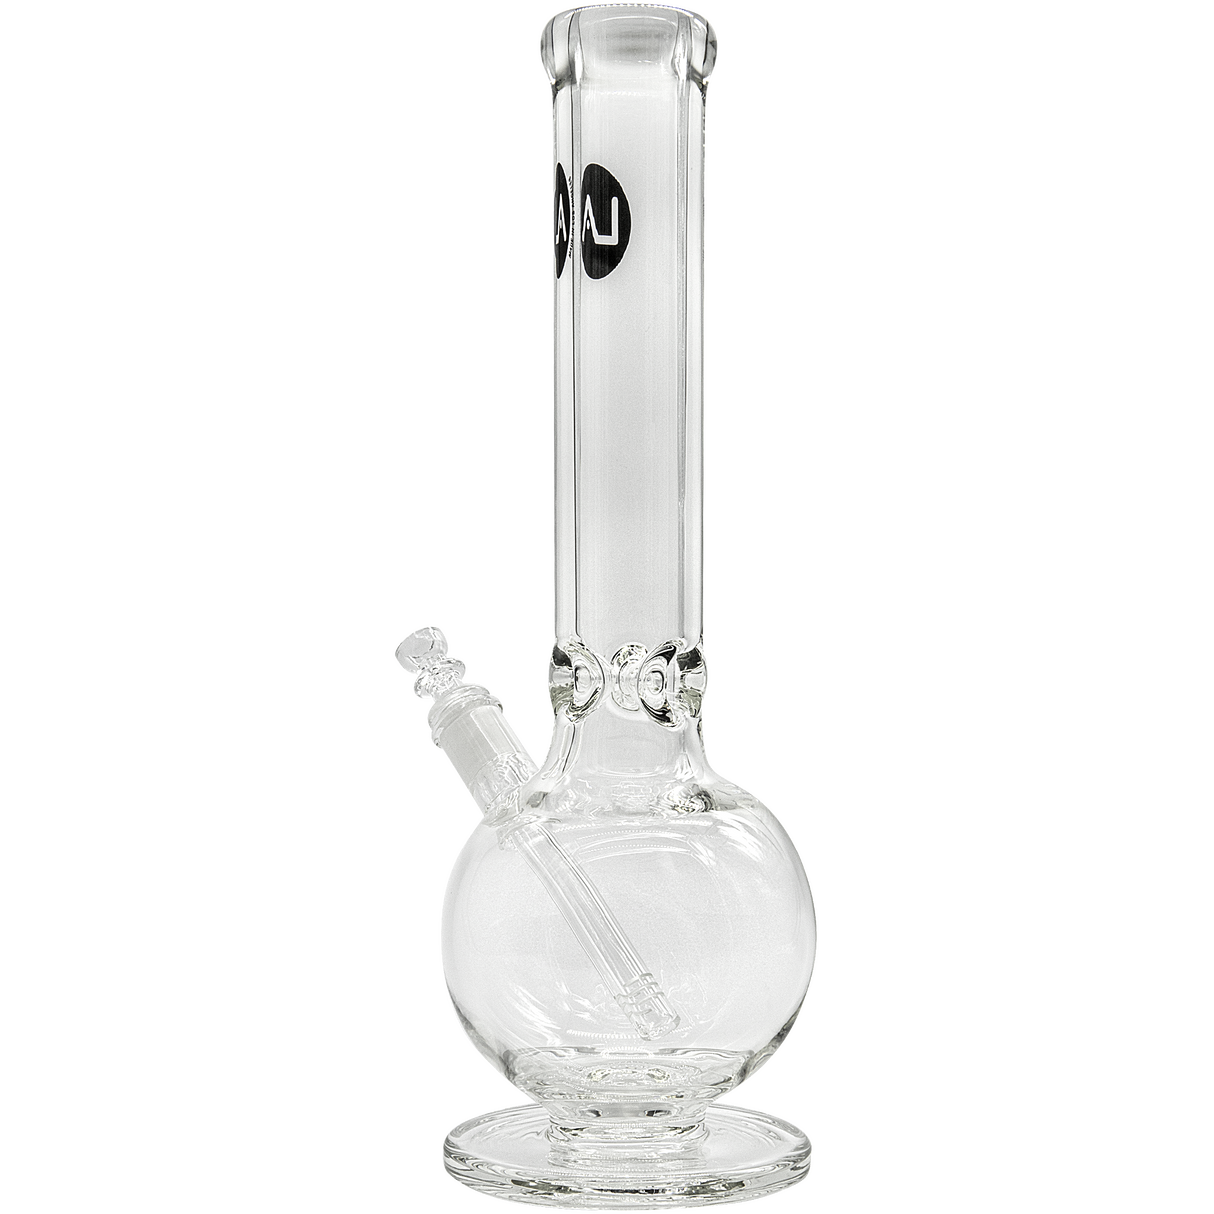 LA Pipes "Bazooka" 9mm Thick Glass Bong, 18" Height, Bubble Design, Front View